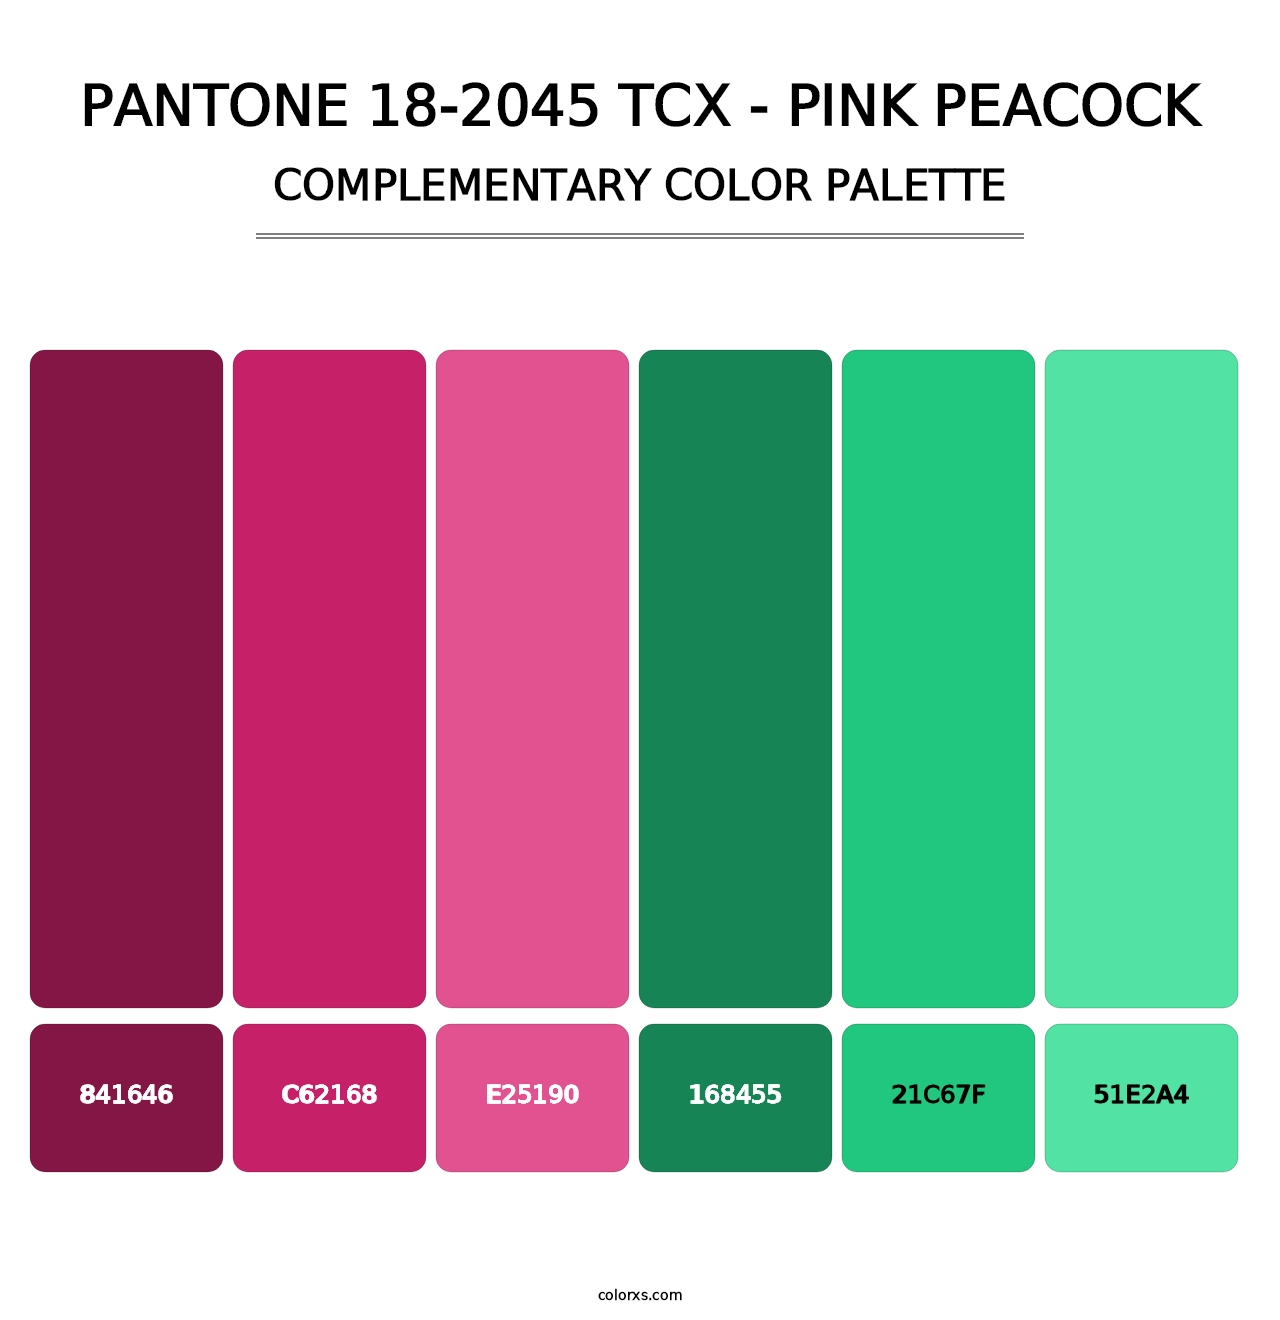 PANTONE 18-2045 TCX - Pink Peacock - Complementary Color Palette